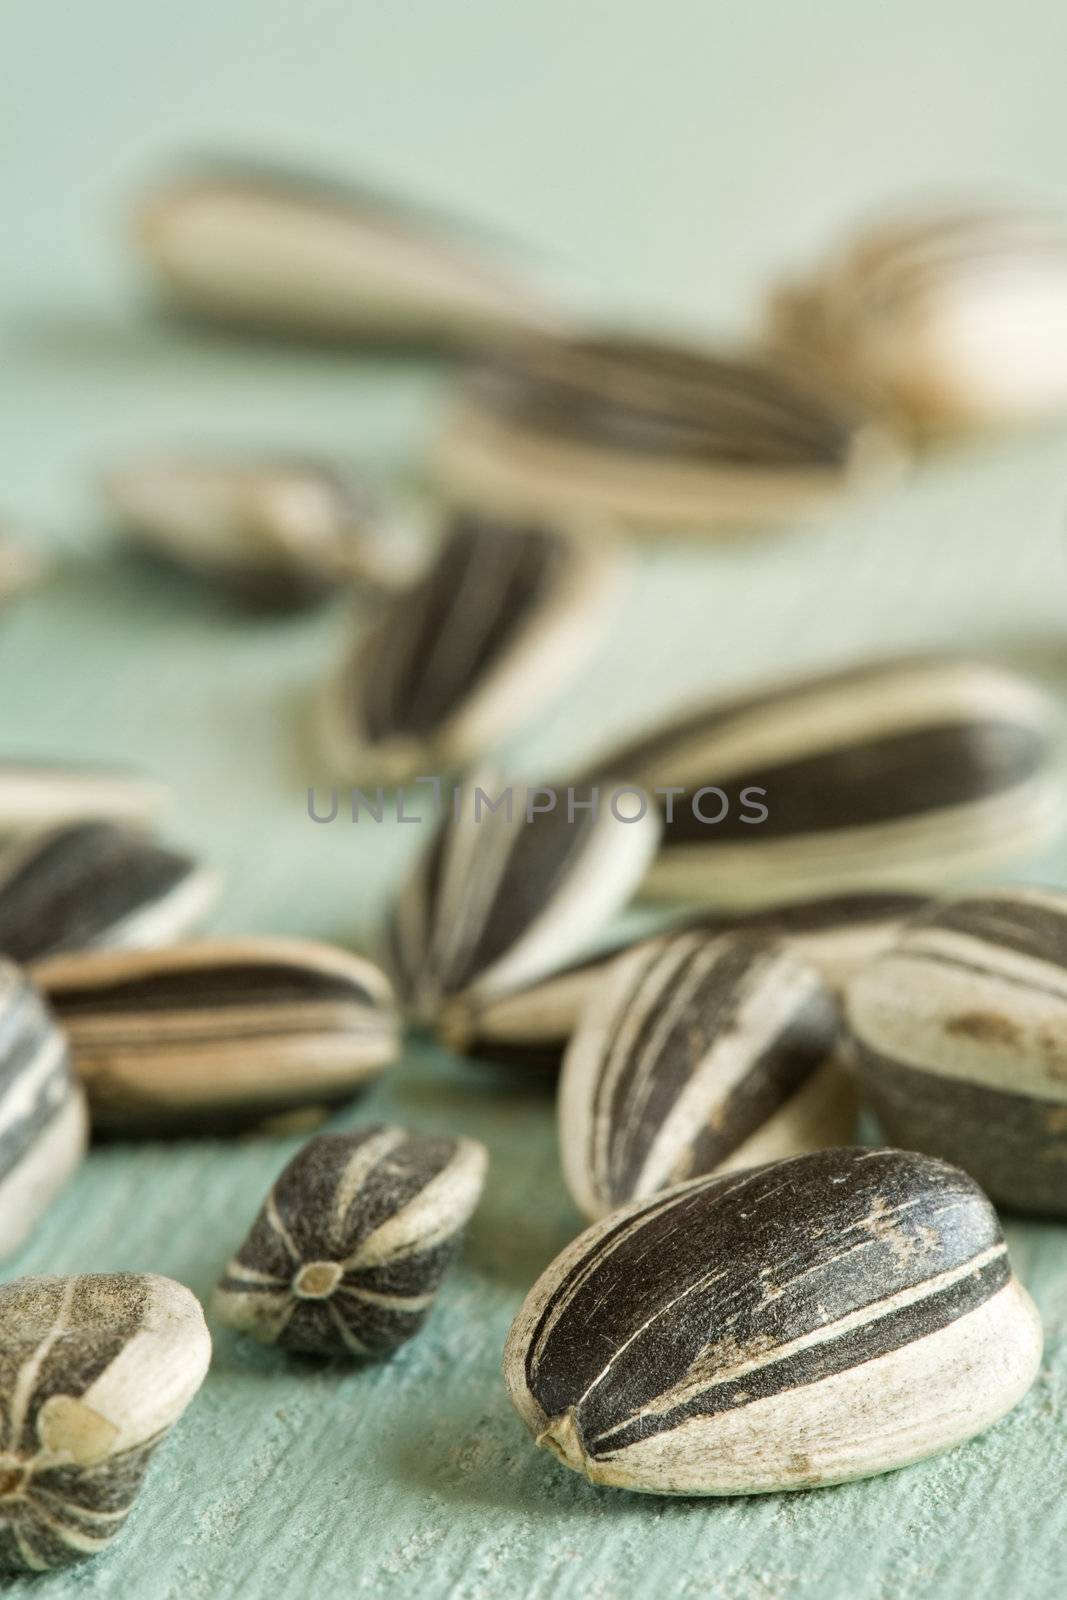 Sunflower seeds by Gravicapa